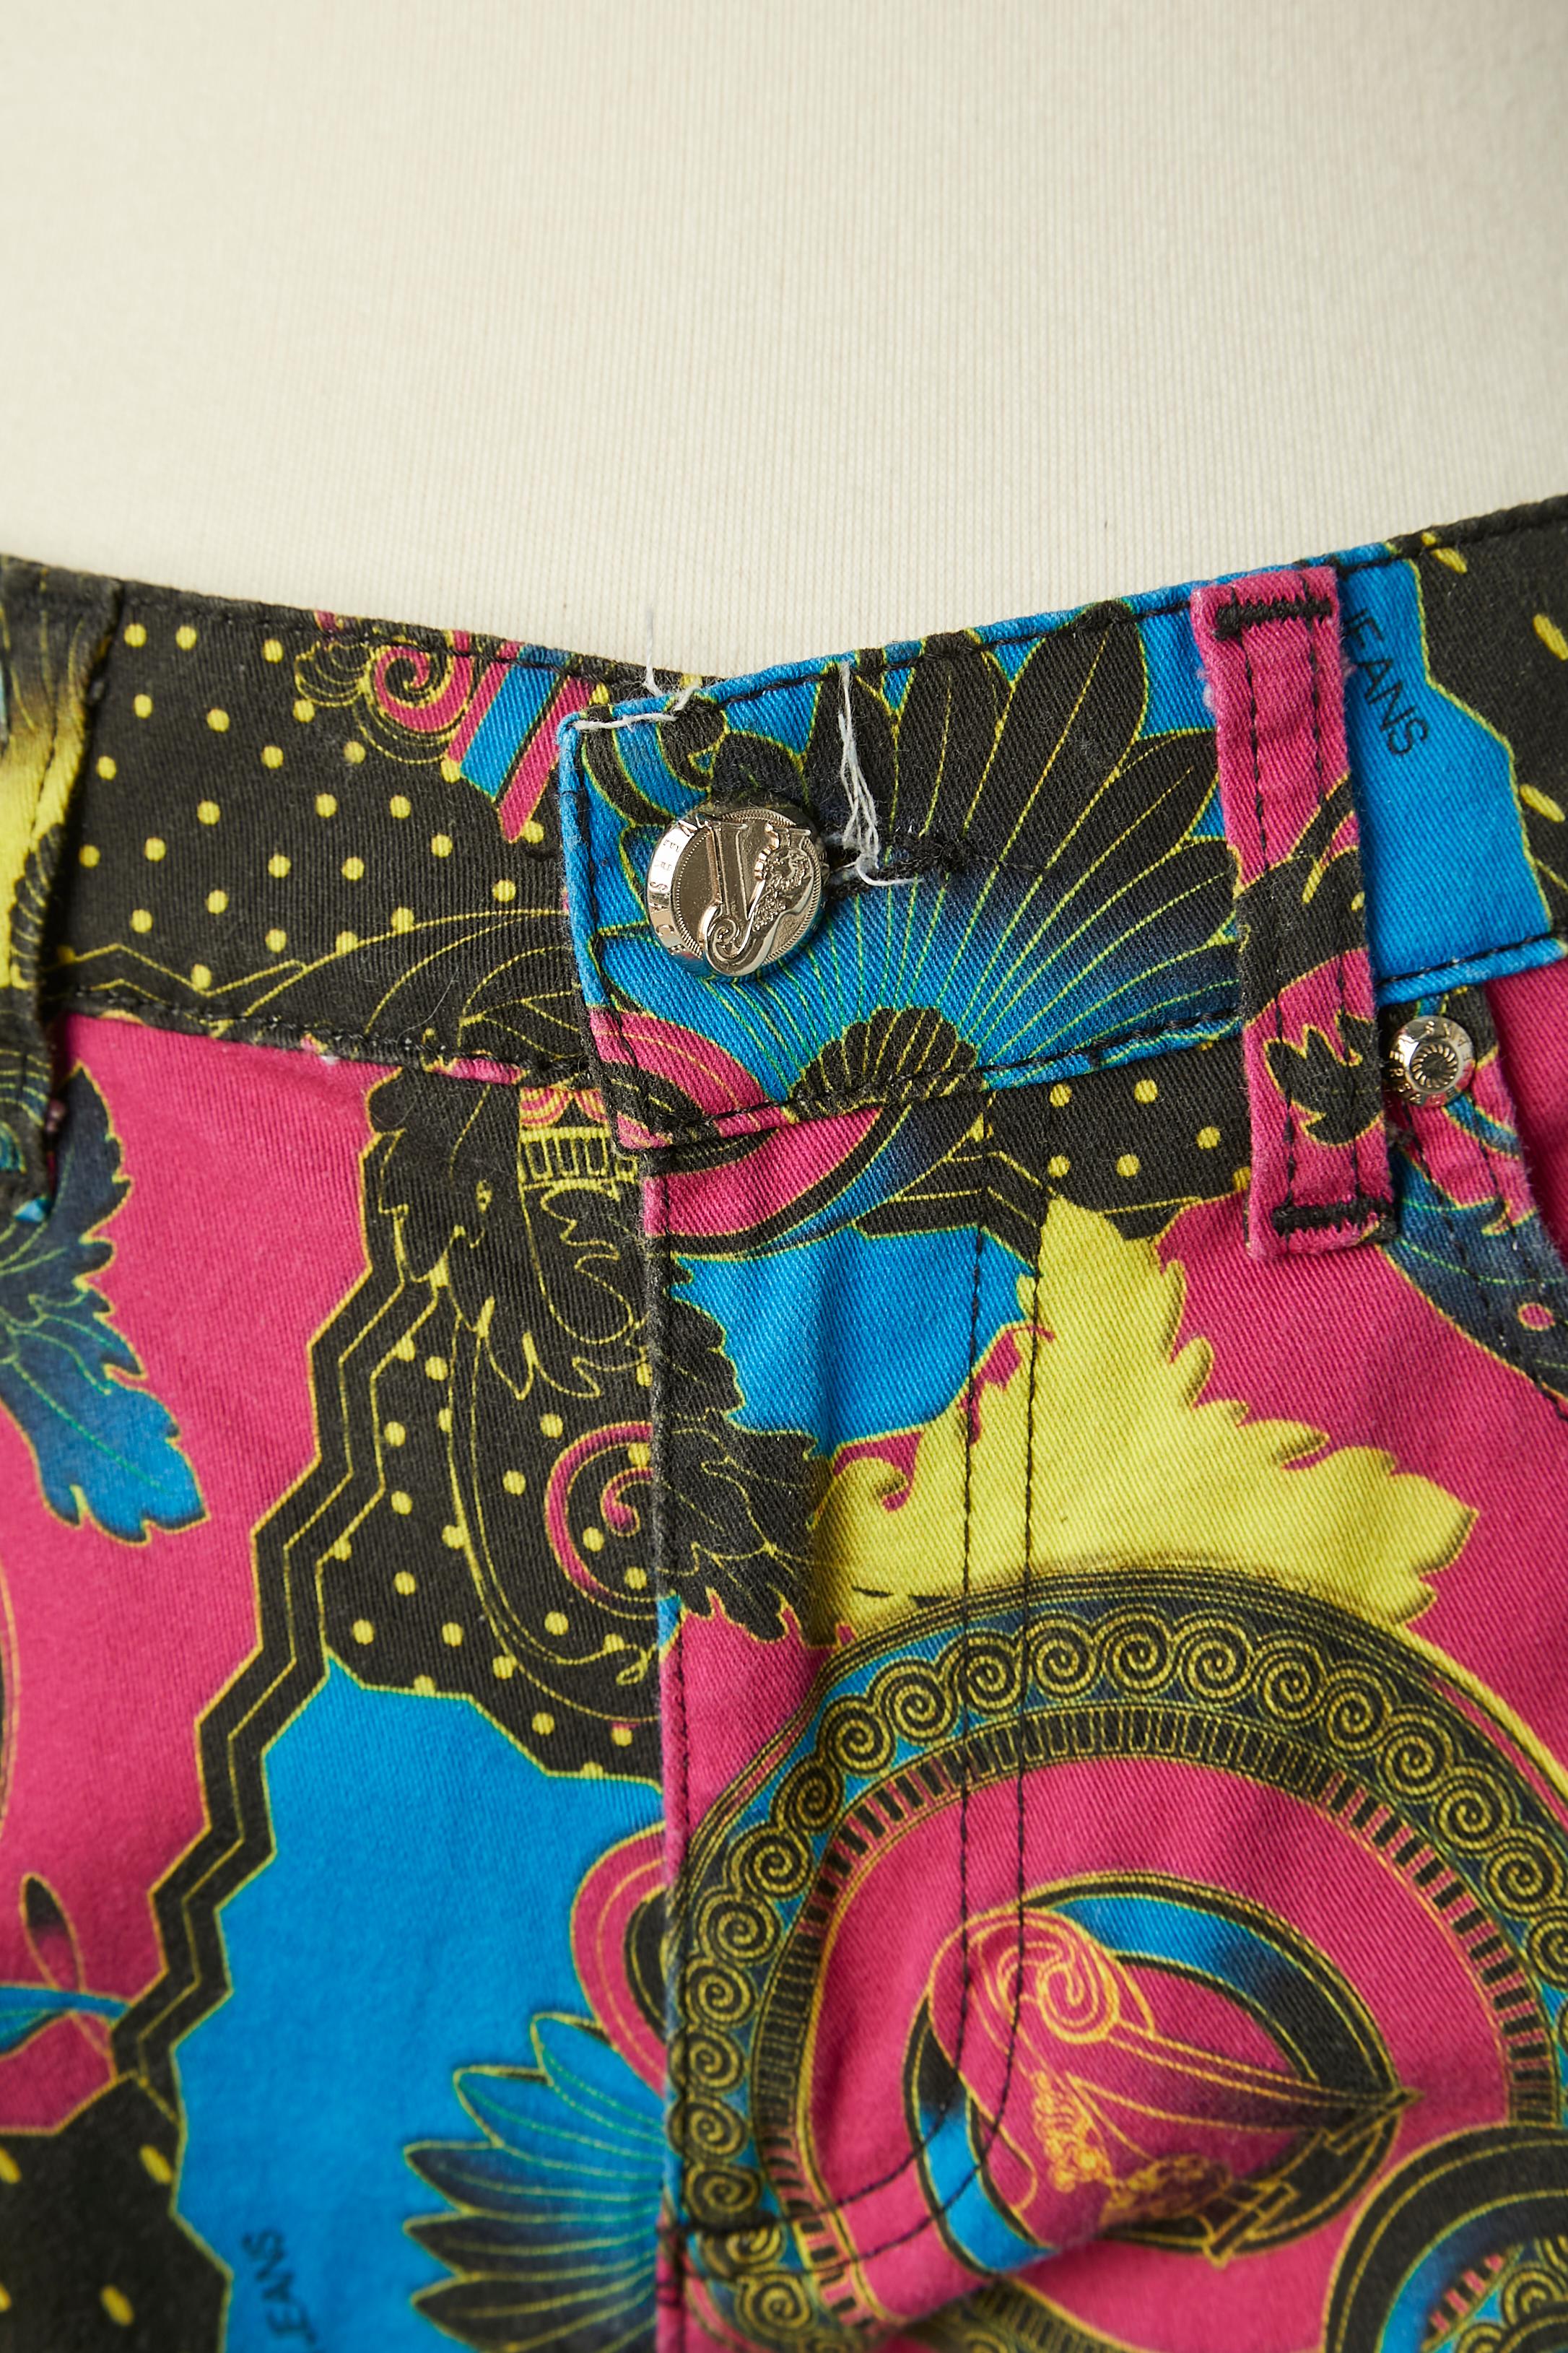 Printed summer short in stretch cotton. Fabric composition: 97% cotton, 3% stretch. Fabric composition lining: 65% polyester, 35% cotton. 
Metallic branded button and studs. Belt-loop.
SIZE: 40 It / 26 Inch / 36 Fr / 26 US